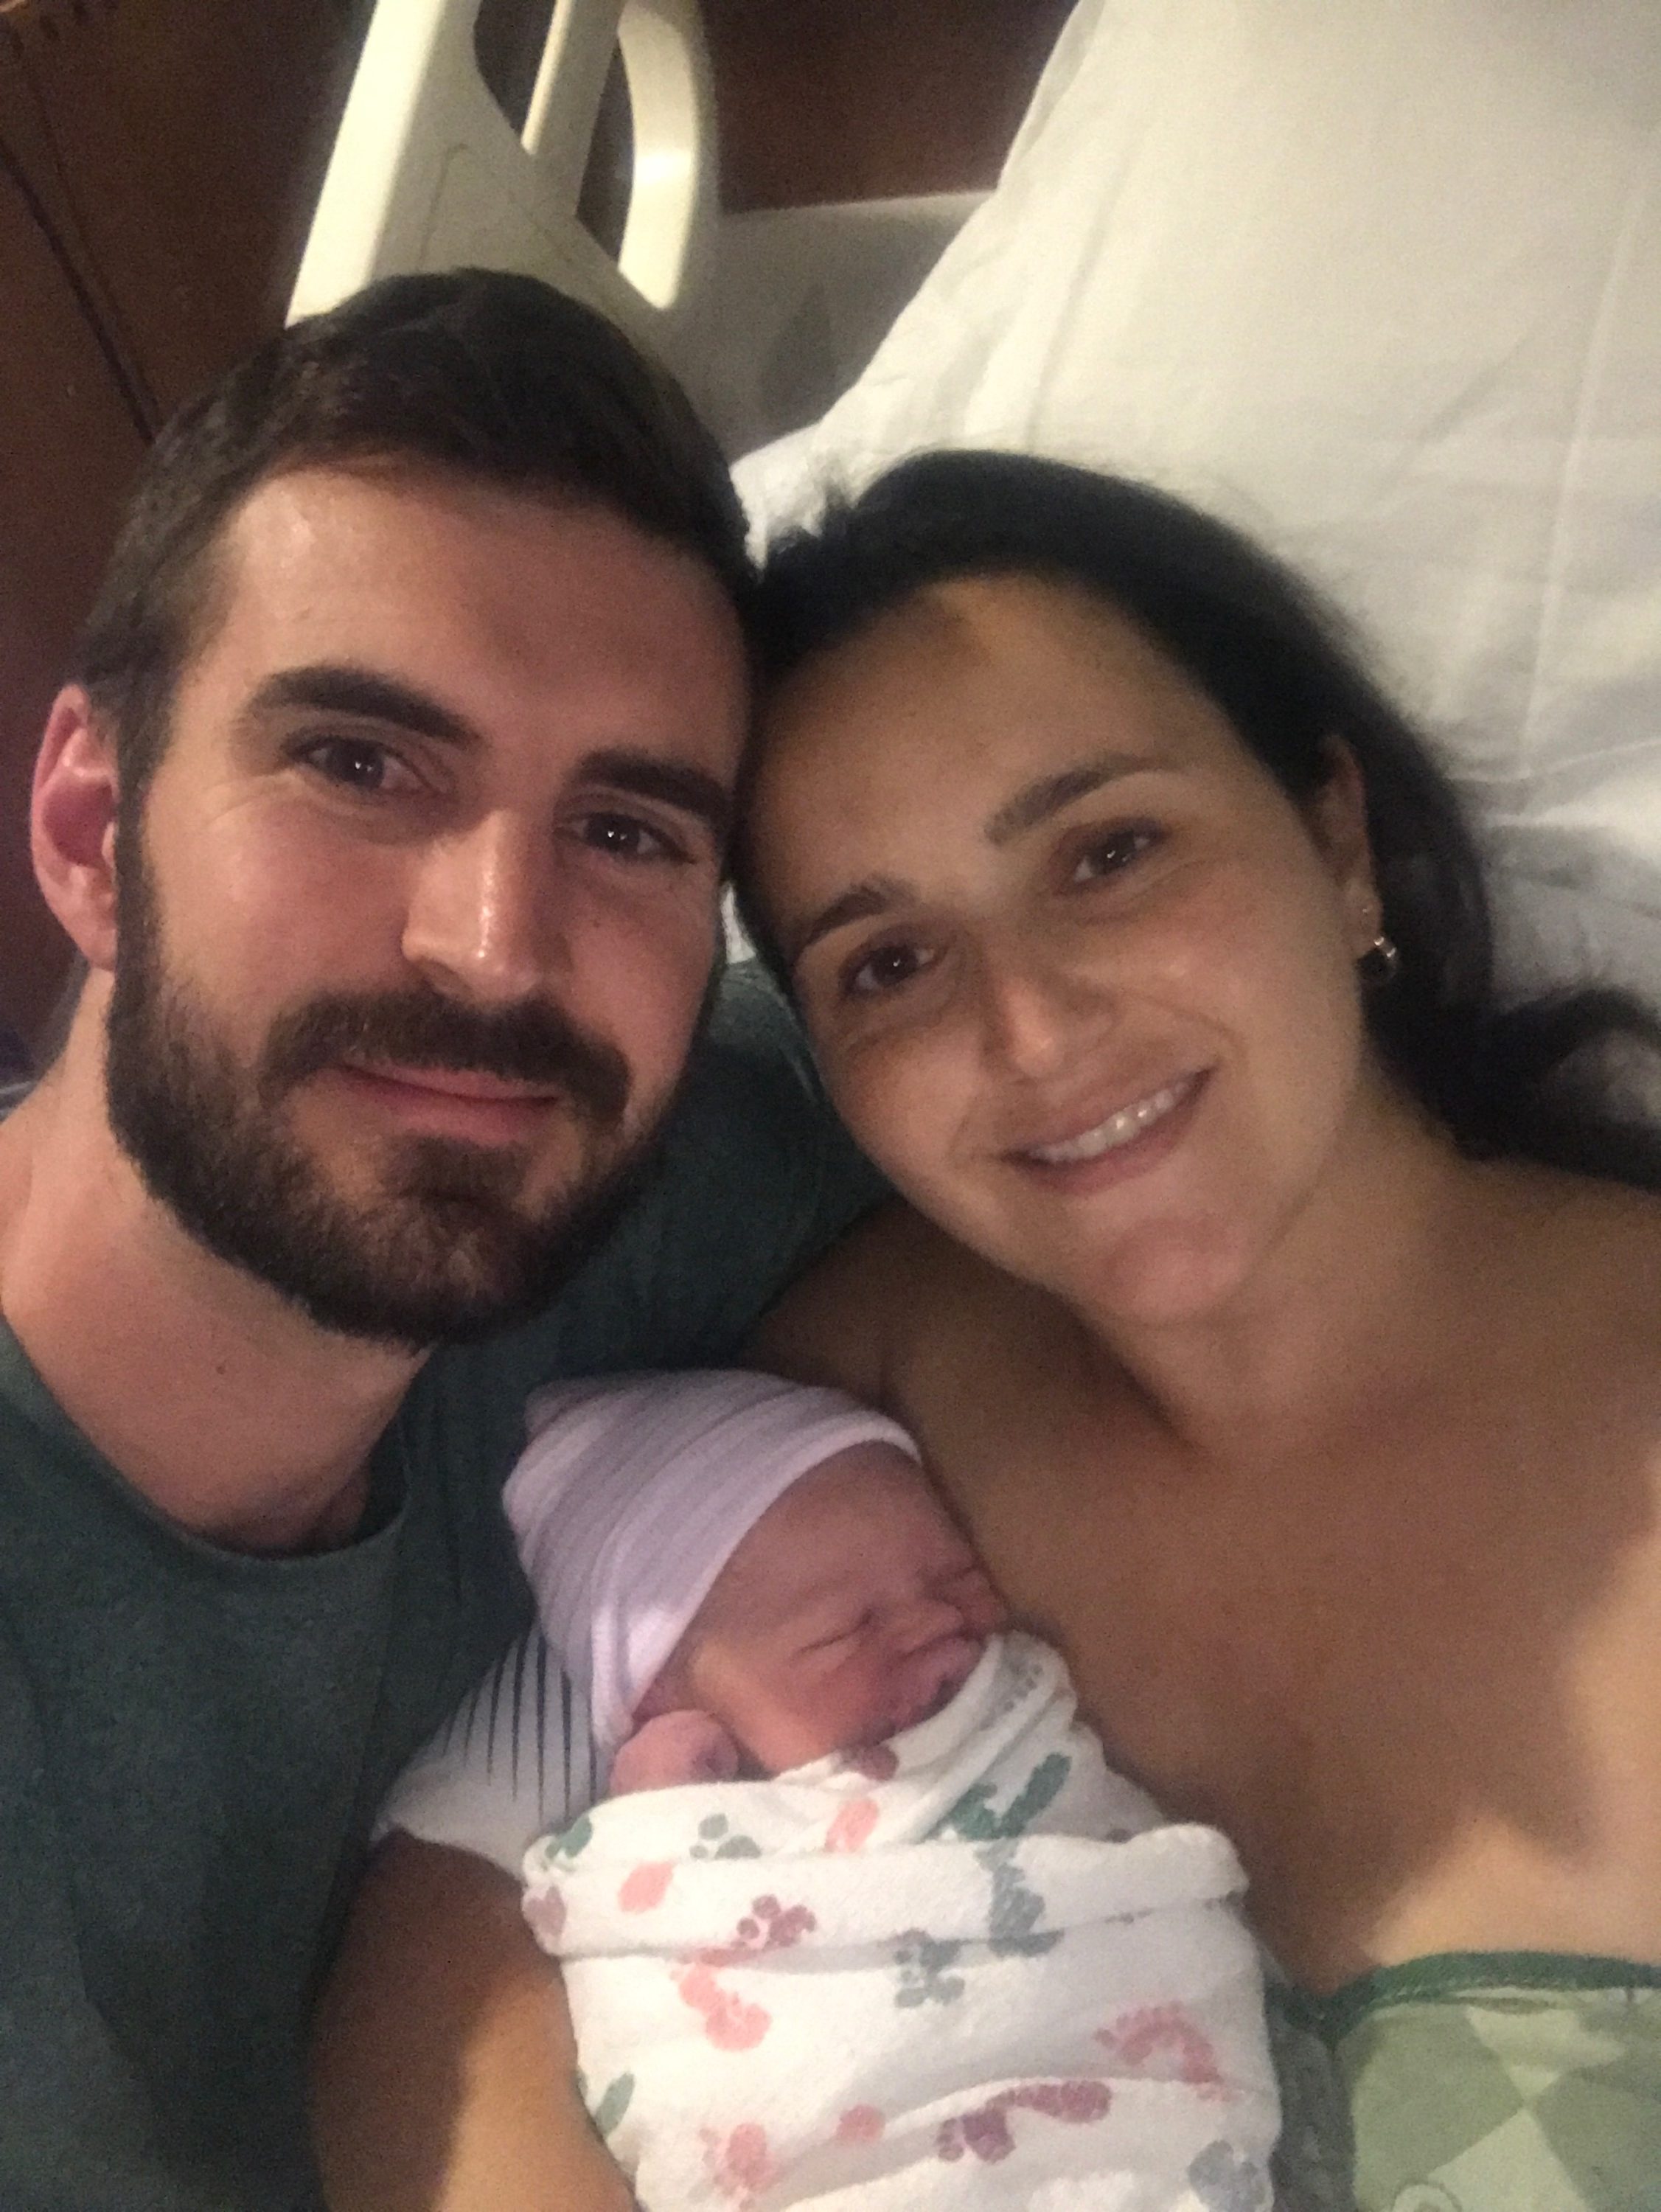 Congrats to Duris and Vanessa on the birth of their son Logan!